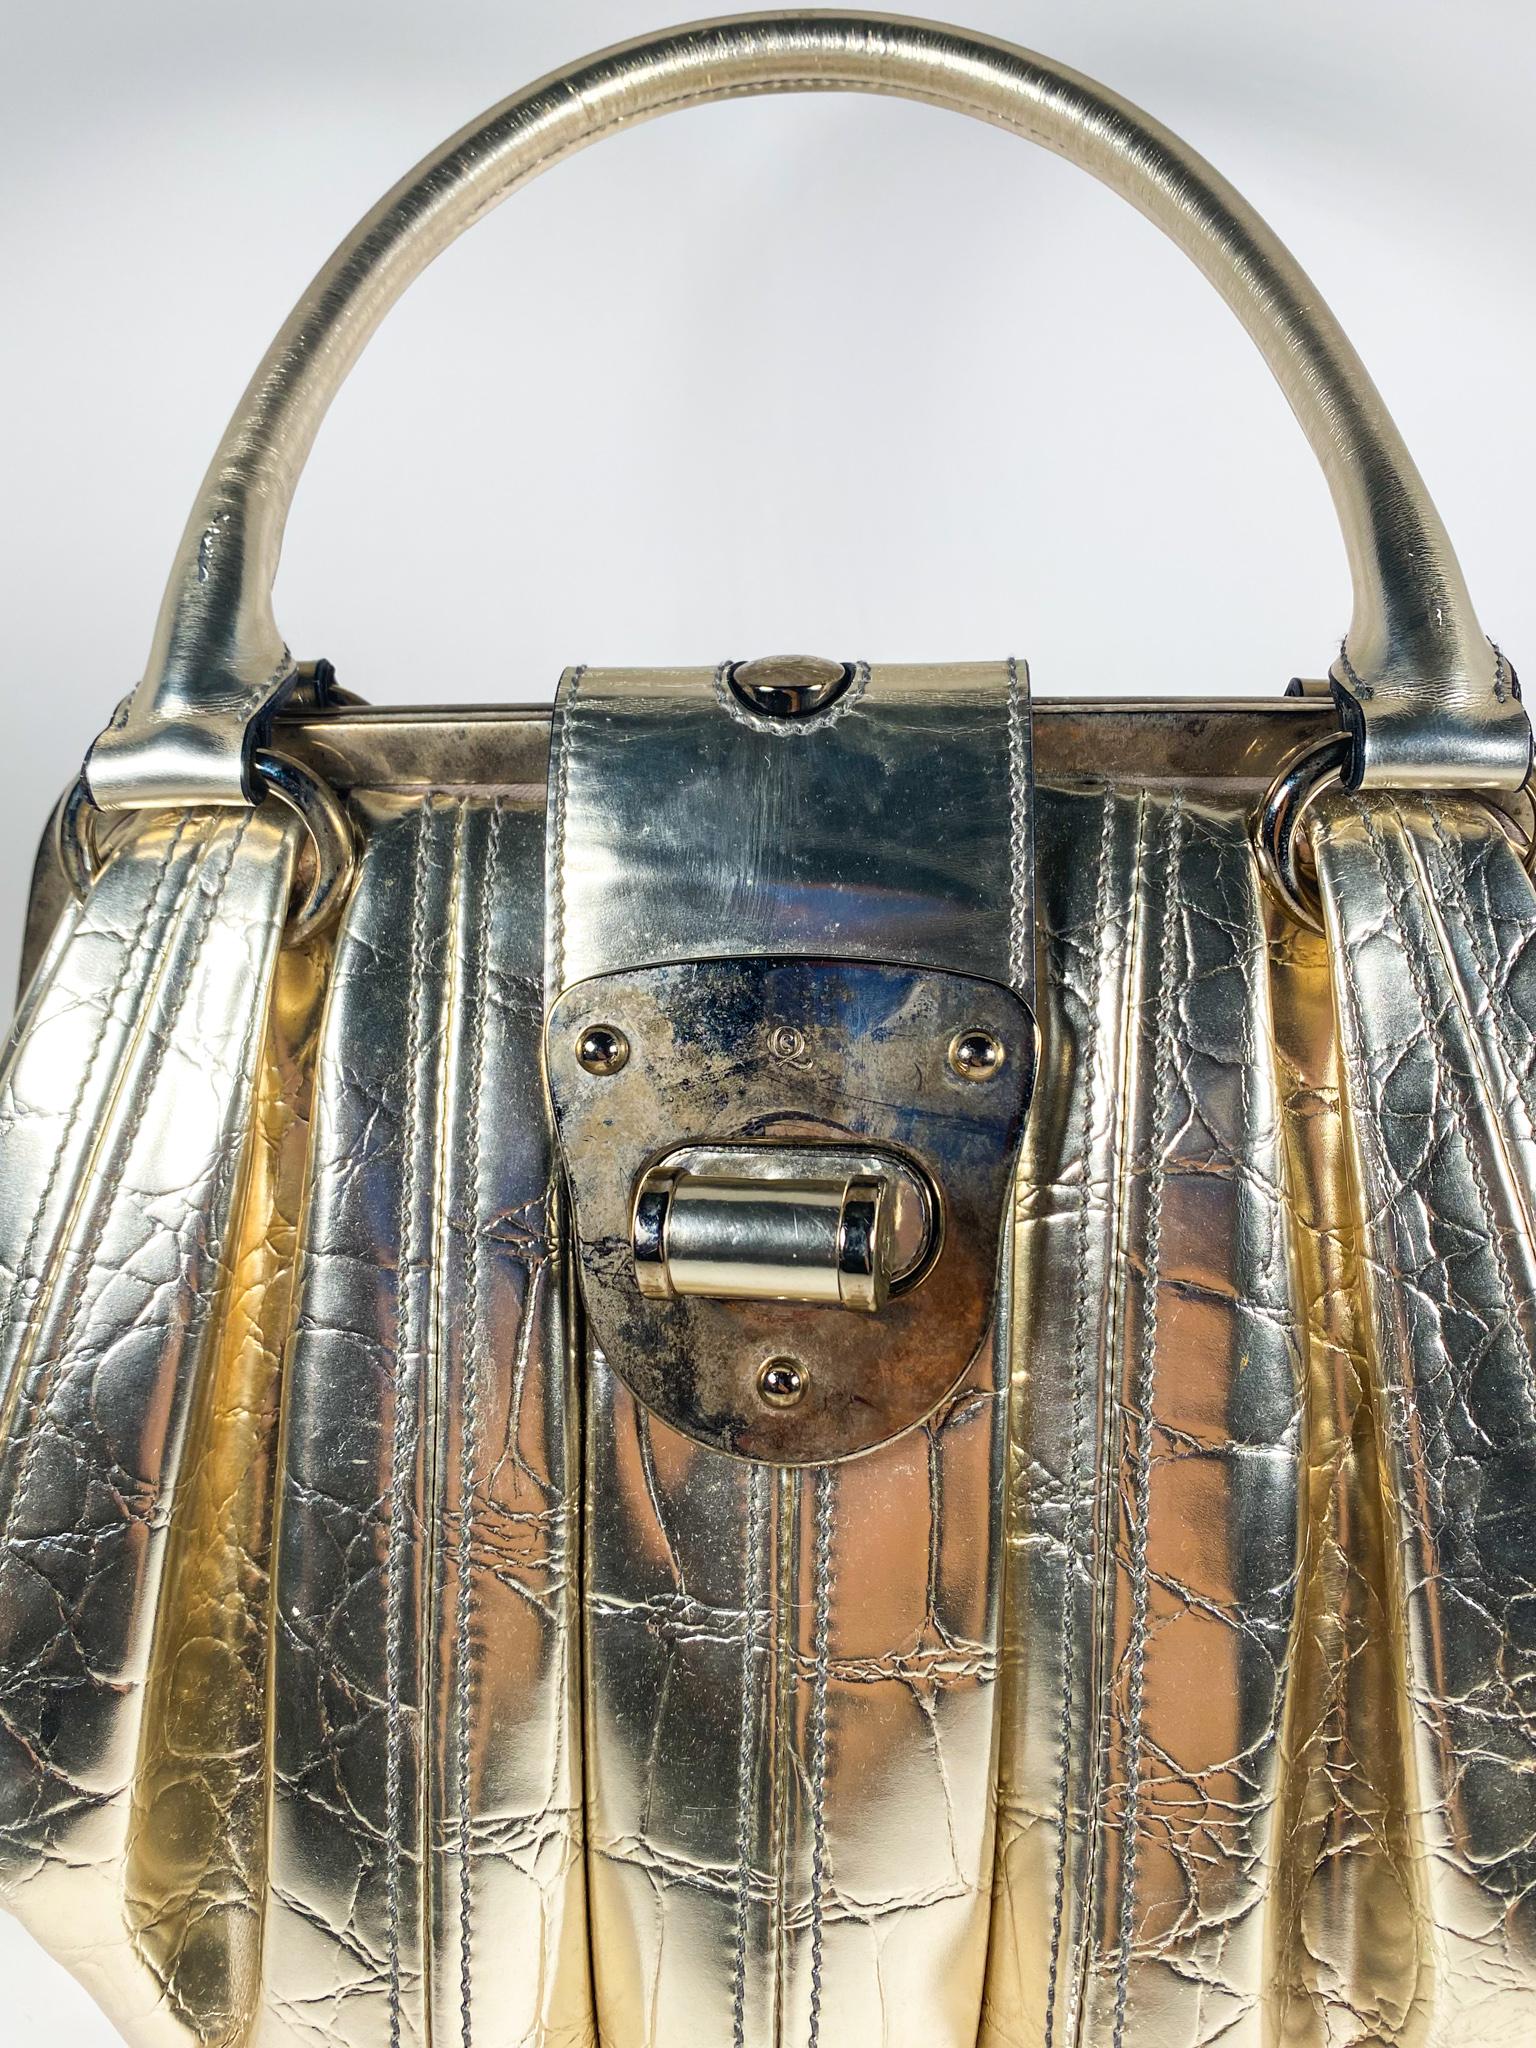 Dramatic structured pleats and chunky turn lock clasps call for a mid 2000’s revival. Made with embossed patent leather, gold-tone hardware, and a fabric lined interior. 

Condition: Okay used condition.
Exterior: Oxidation, discoloration and some